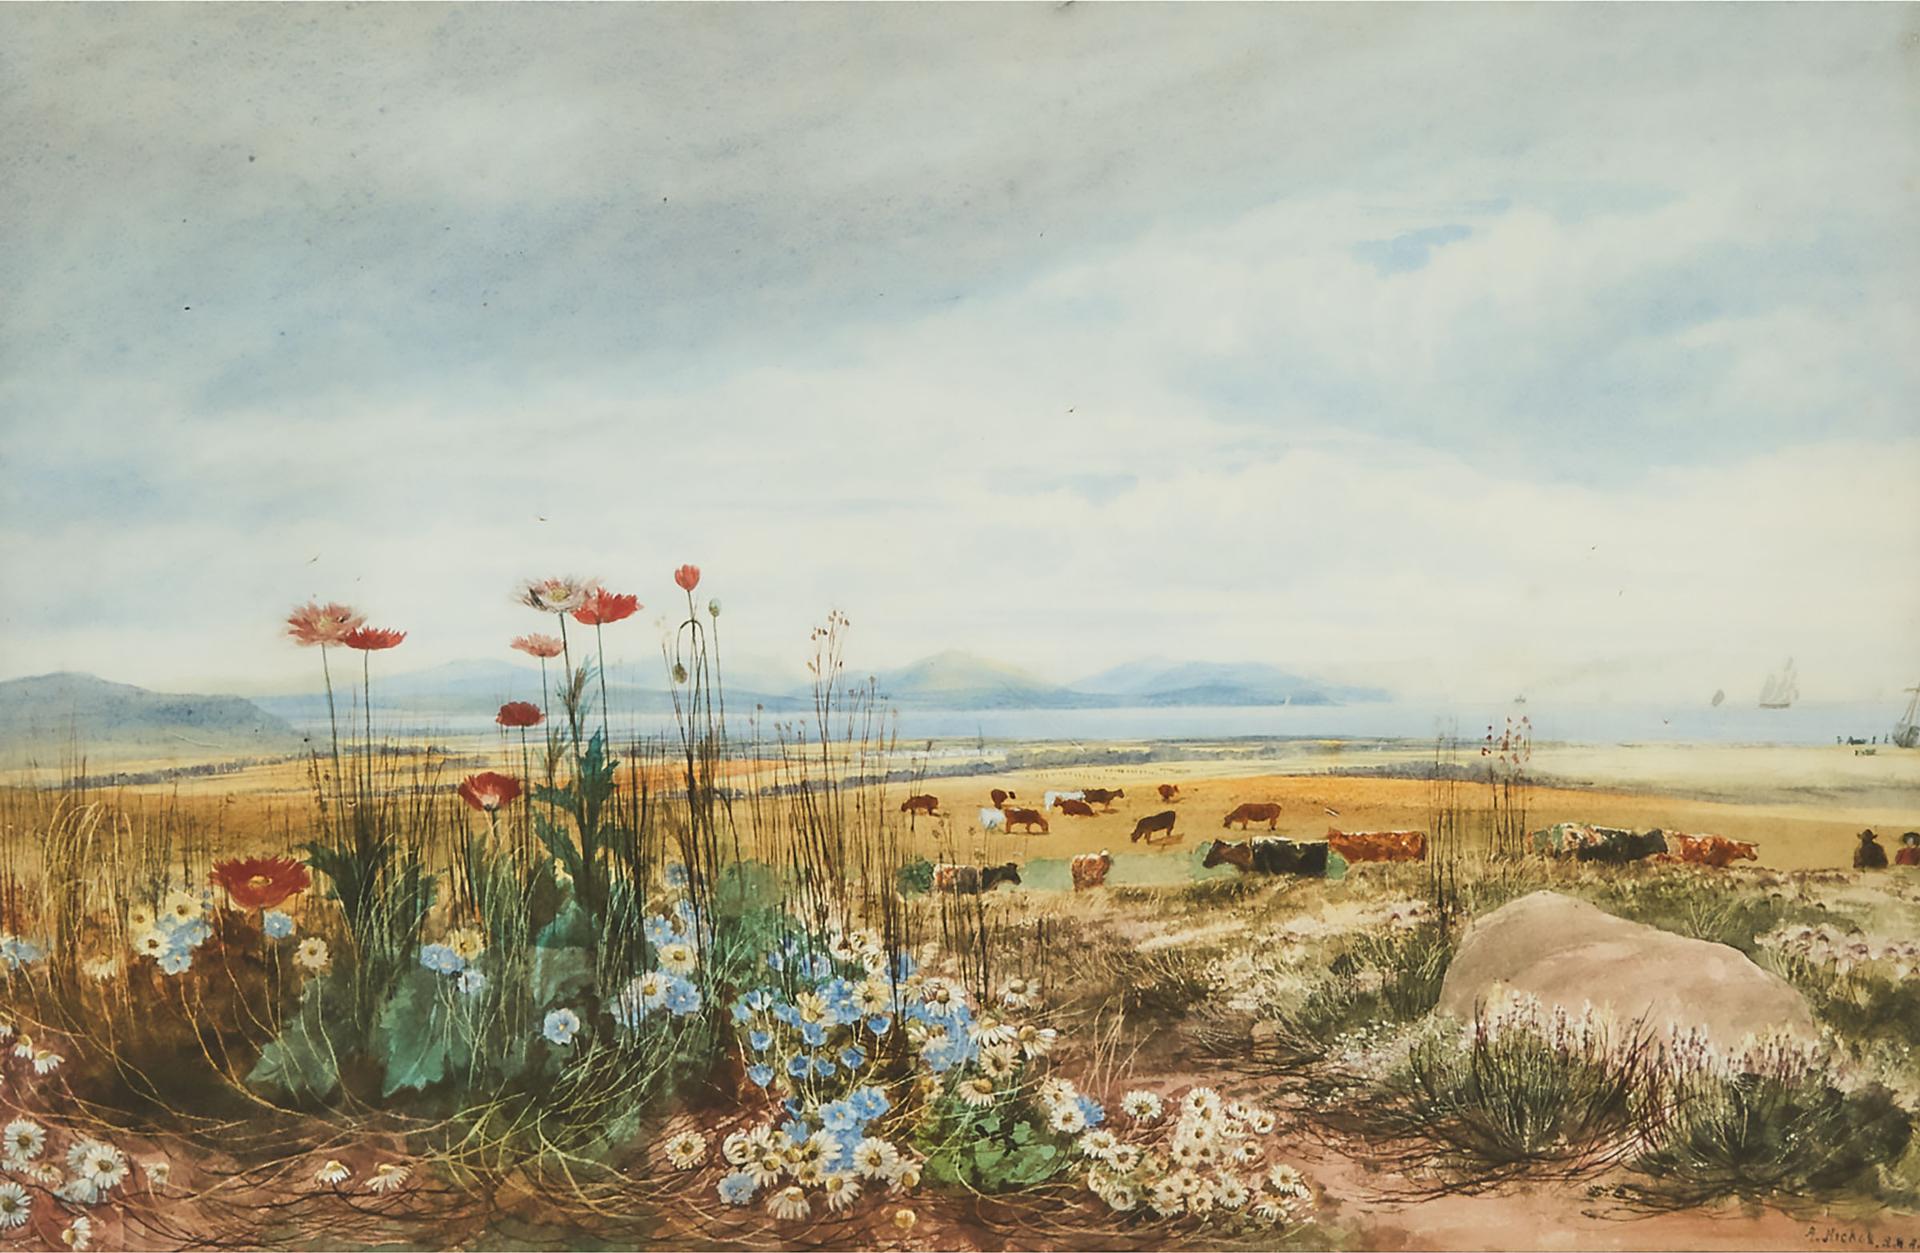 Andrew Nicholl - Bank Of Wildflowers With A View Of Cattle On A Mountainous Coast With Shipping